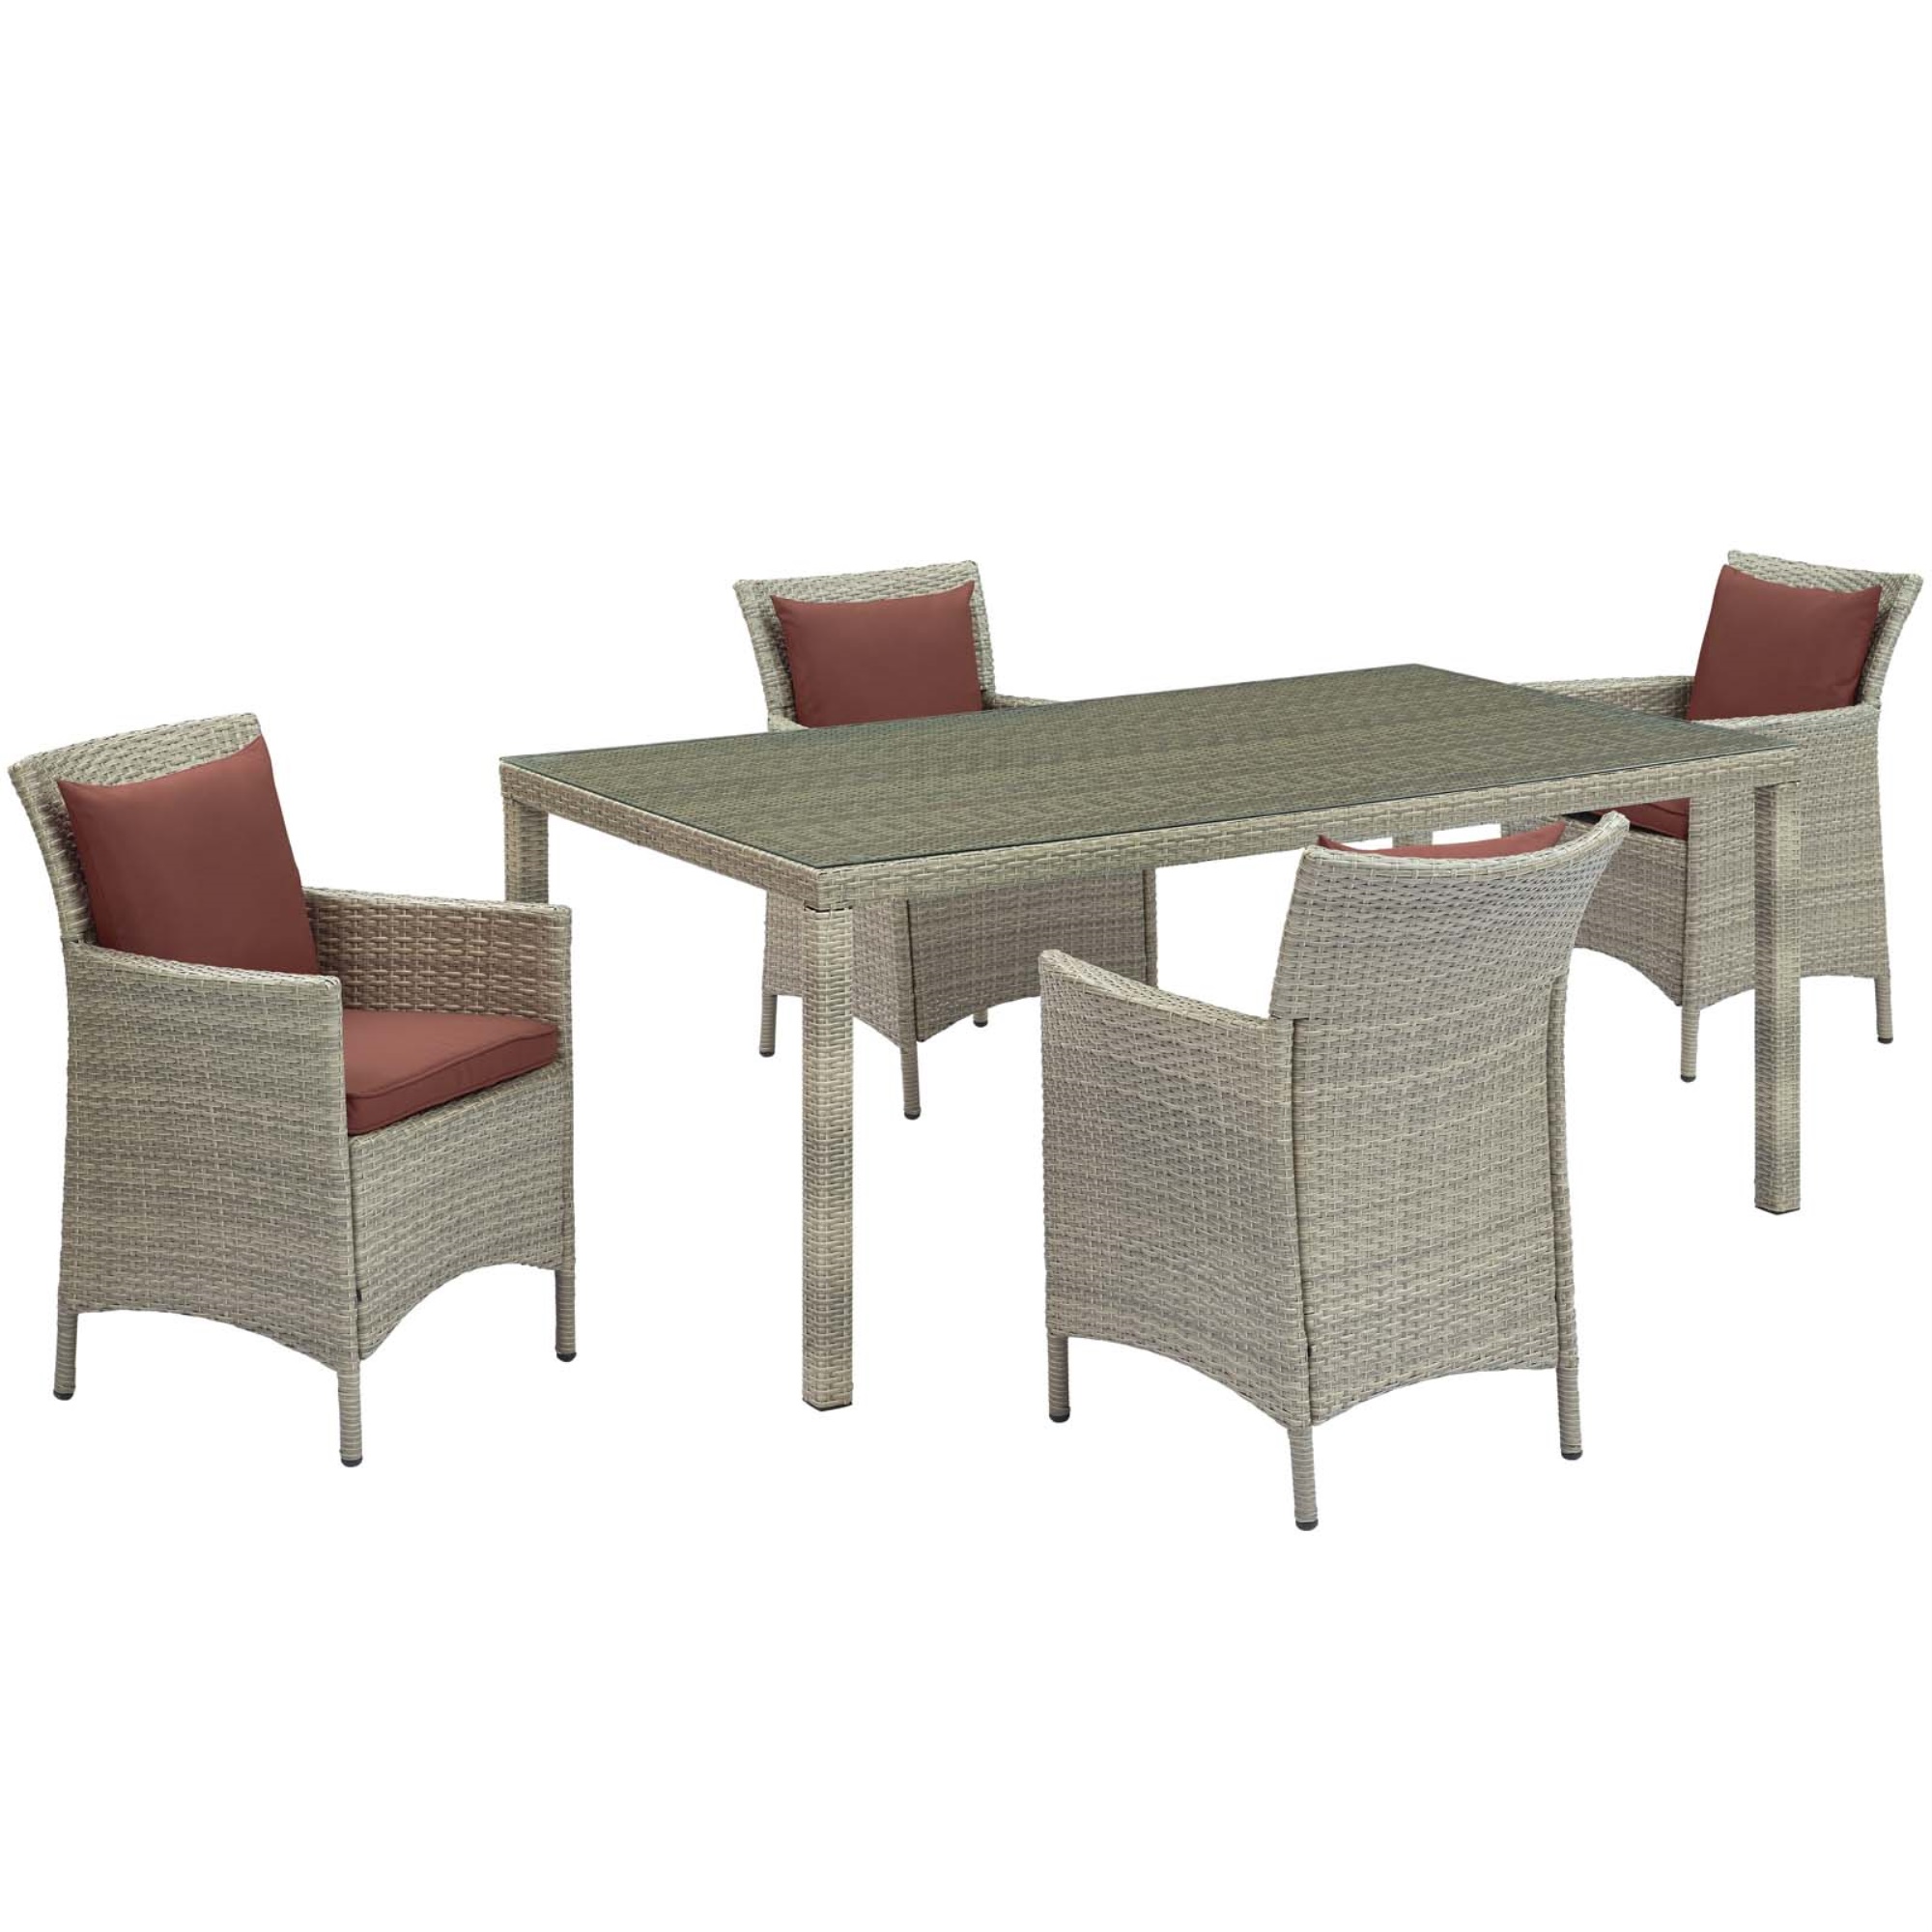 Ergode Conduit Outdoor Patio Dining Collection - Transitional Style, UV-Resistant Wicker Rattan, Weatherproof, 5 Piece Set